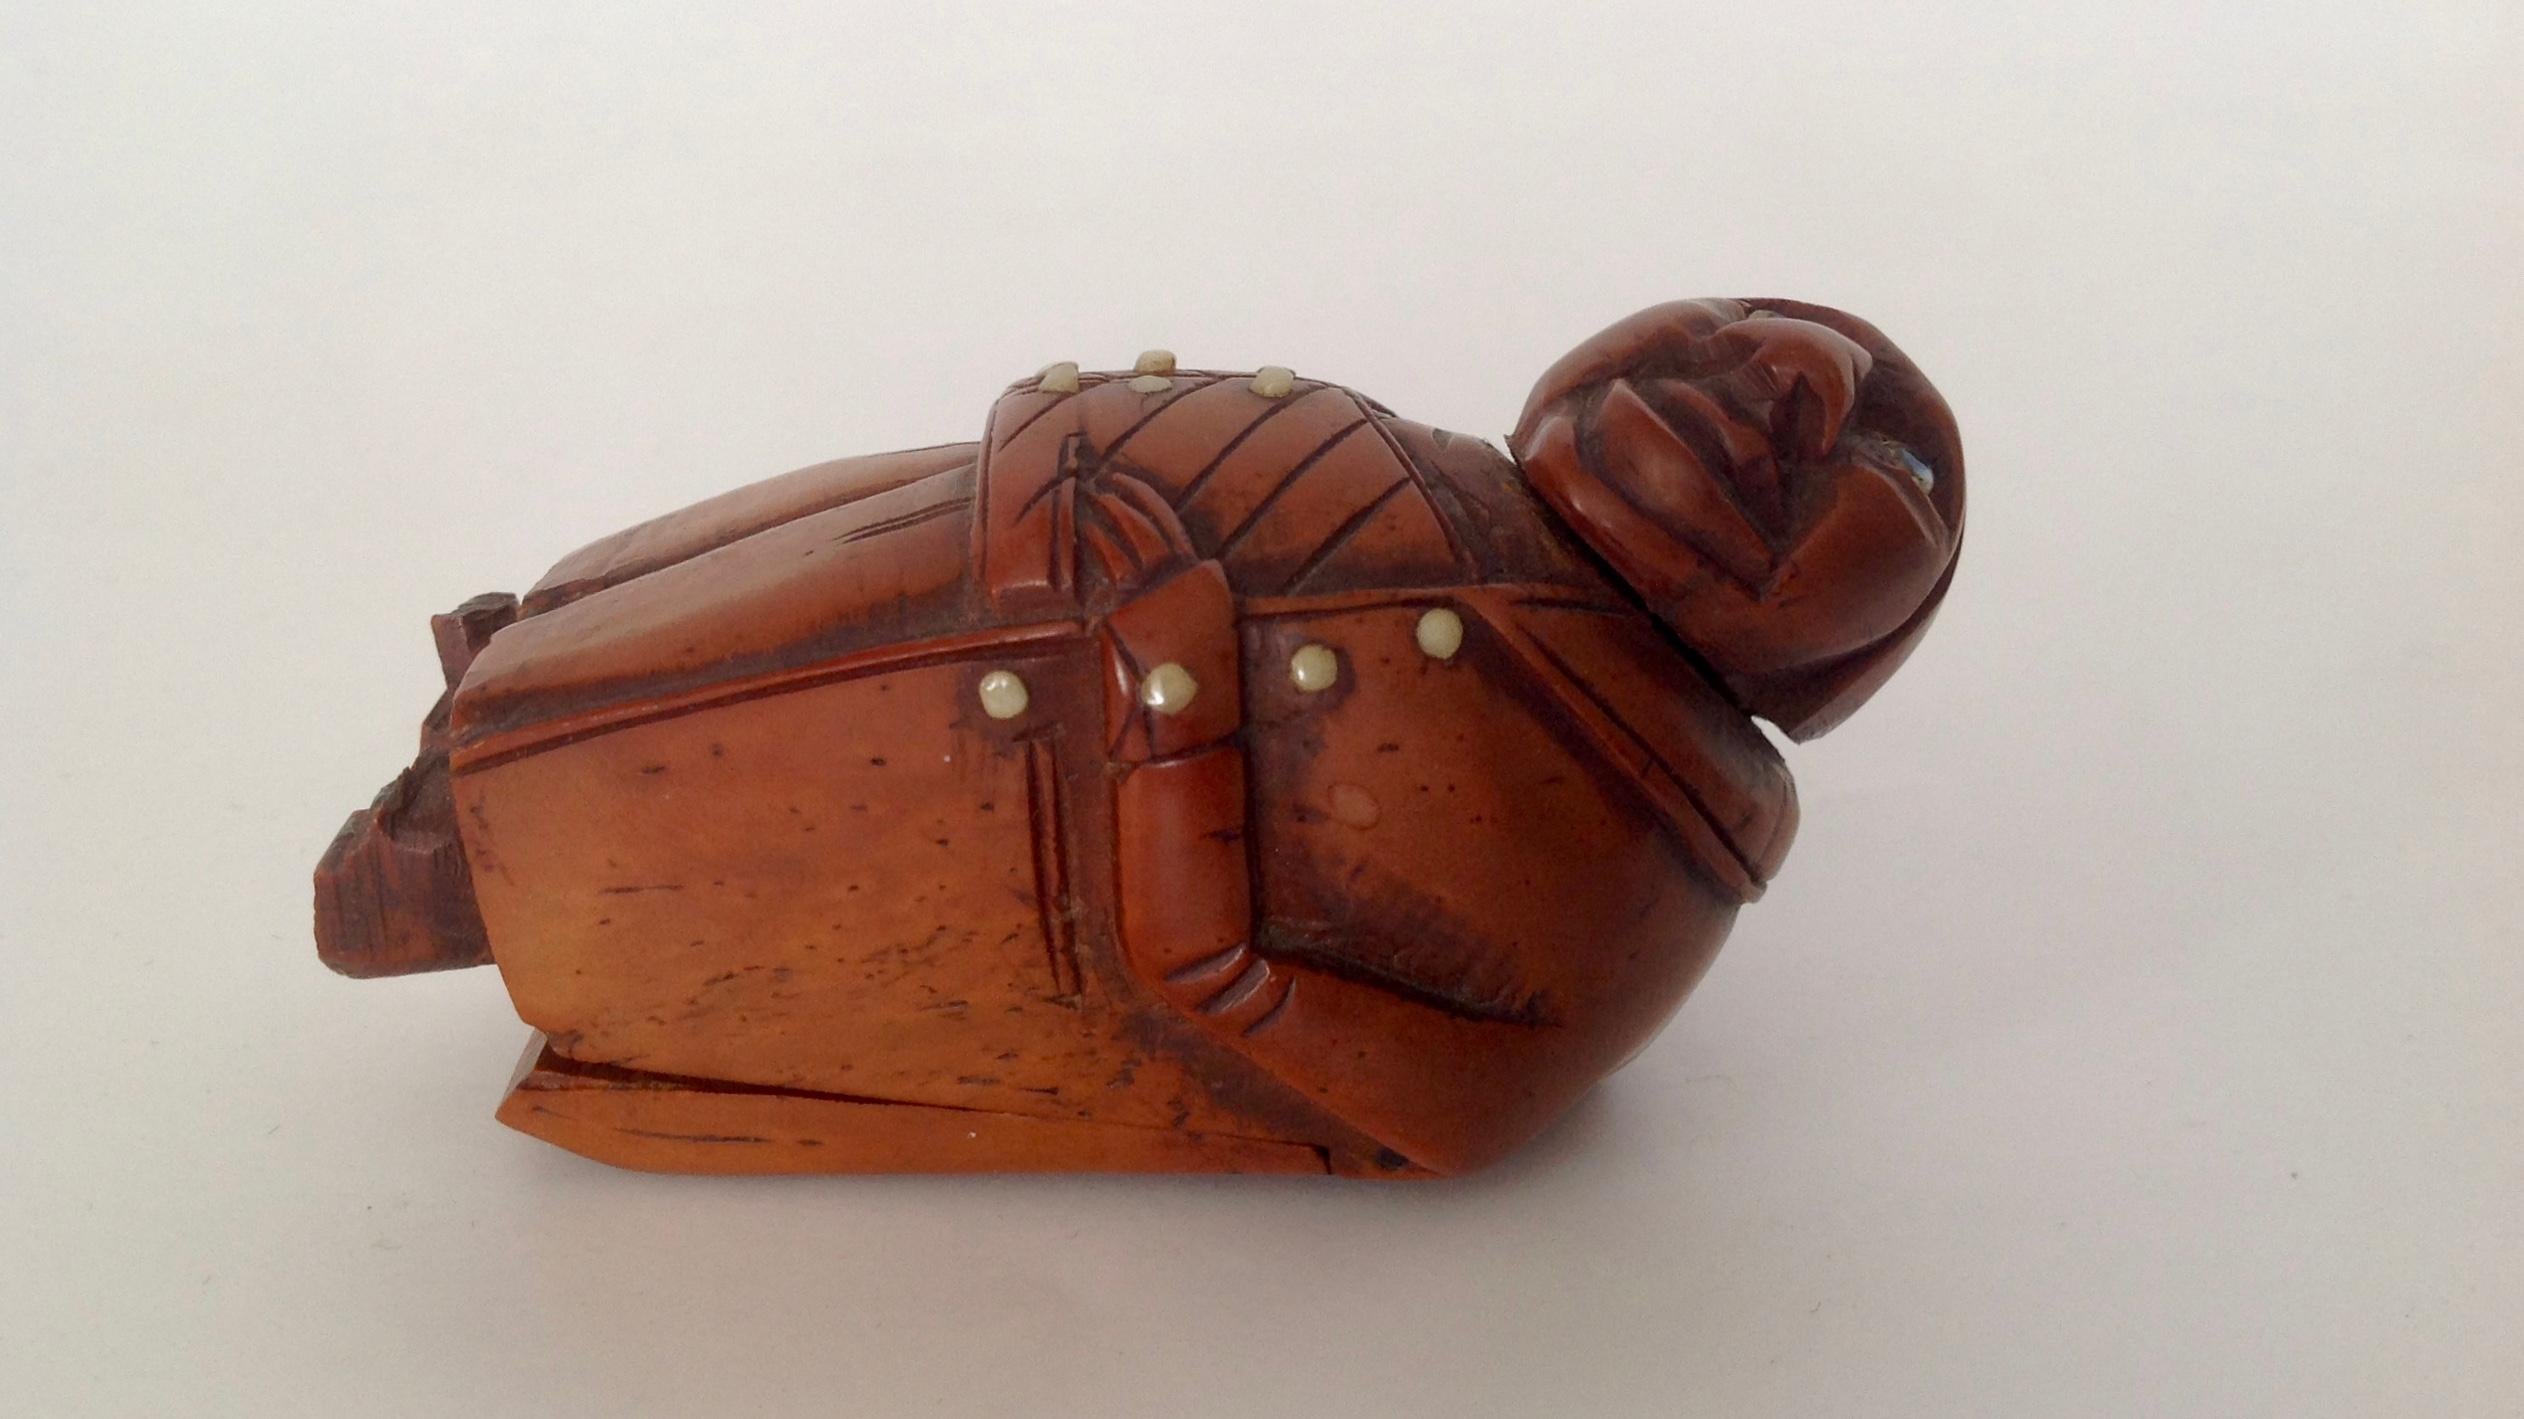 Carved in the form of a figure from a Charles Dickens novel - the whimsical figure is designed
with a coat tail that lifts revealing the secret compartment.
The eyes and buttons appear to be glass.